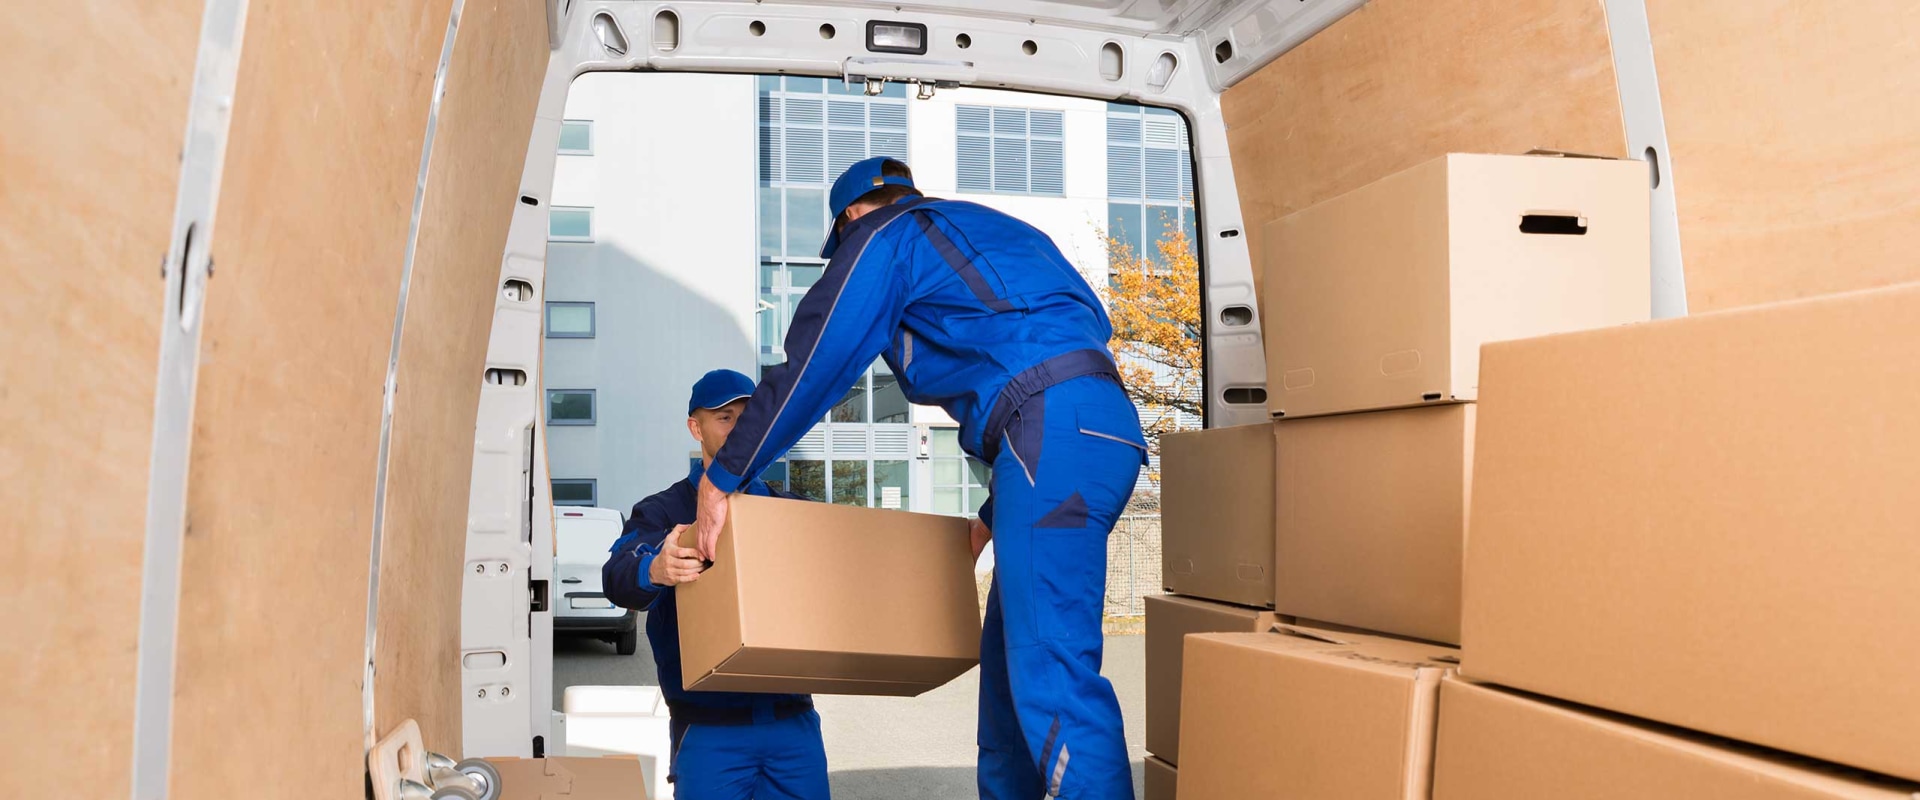 Full-Service Moving: Everything You Need to Know